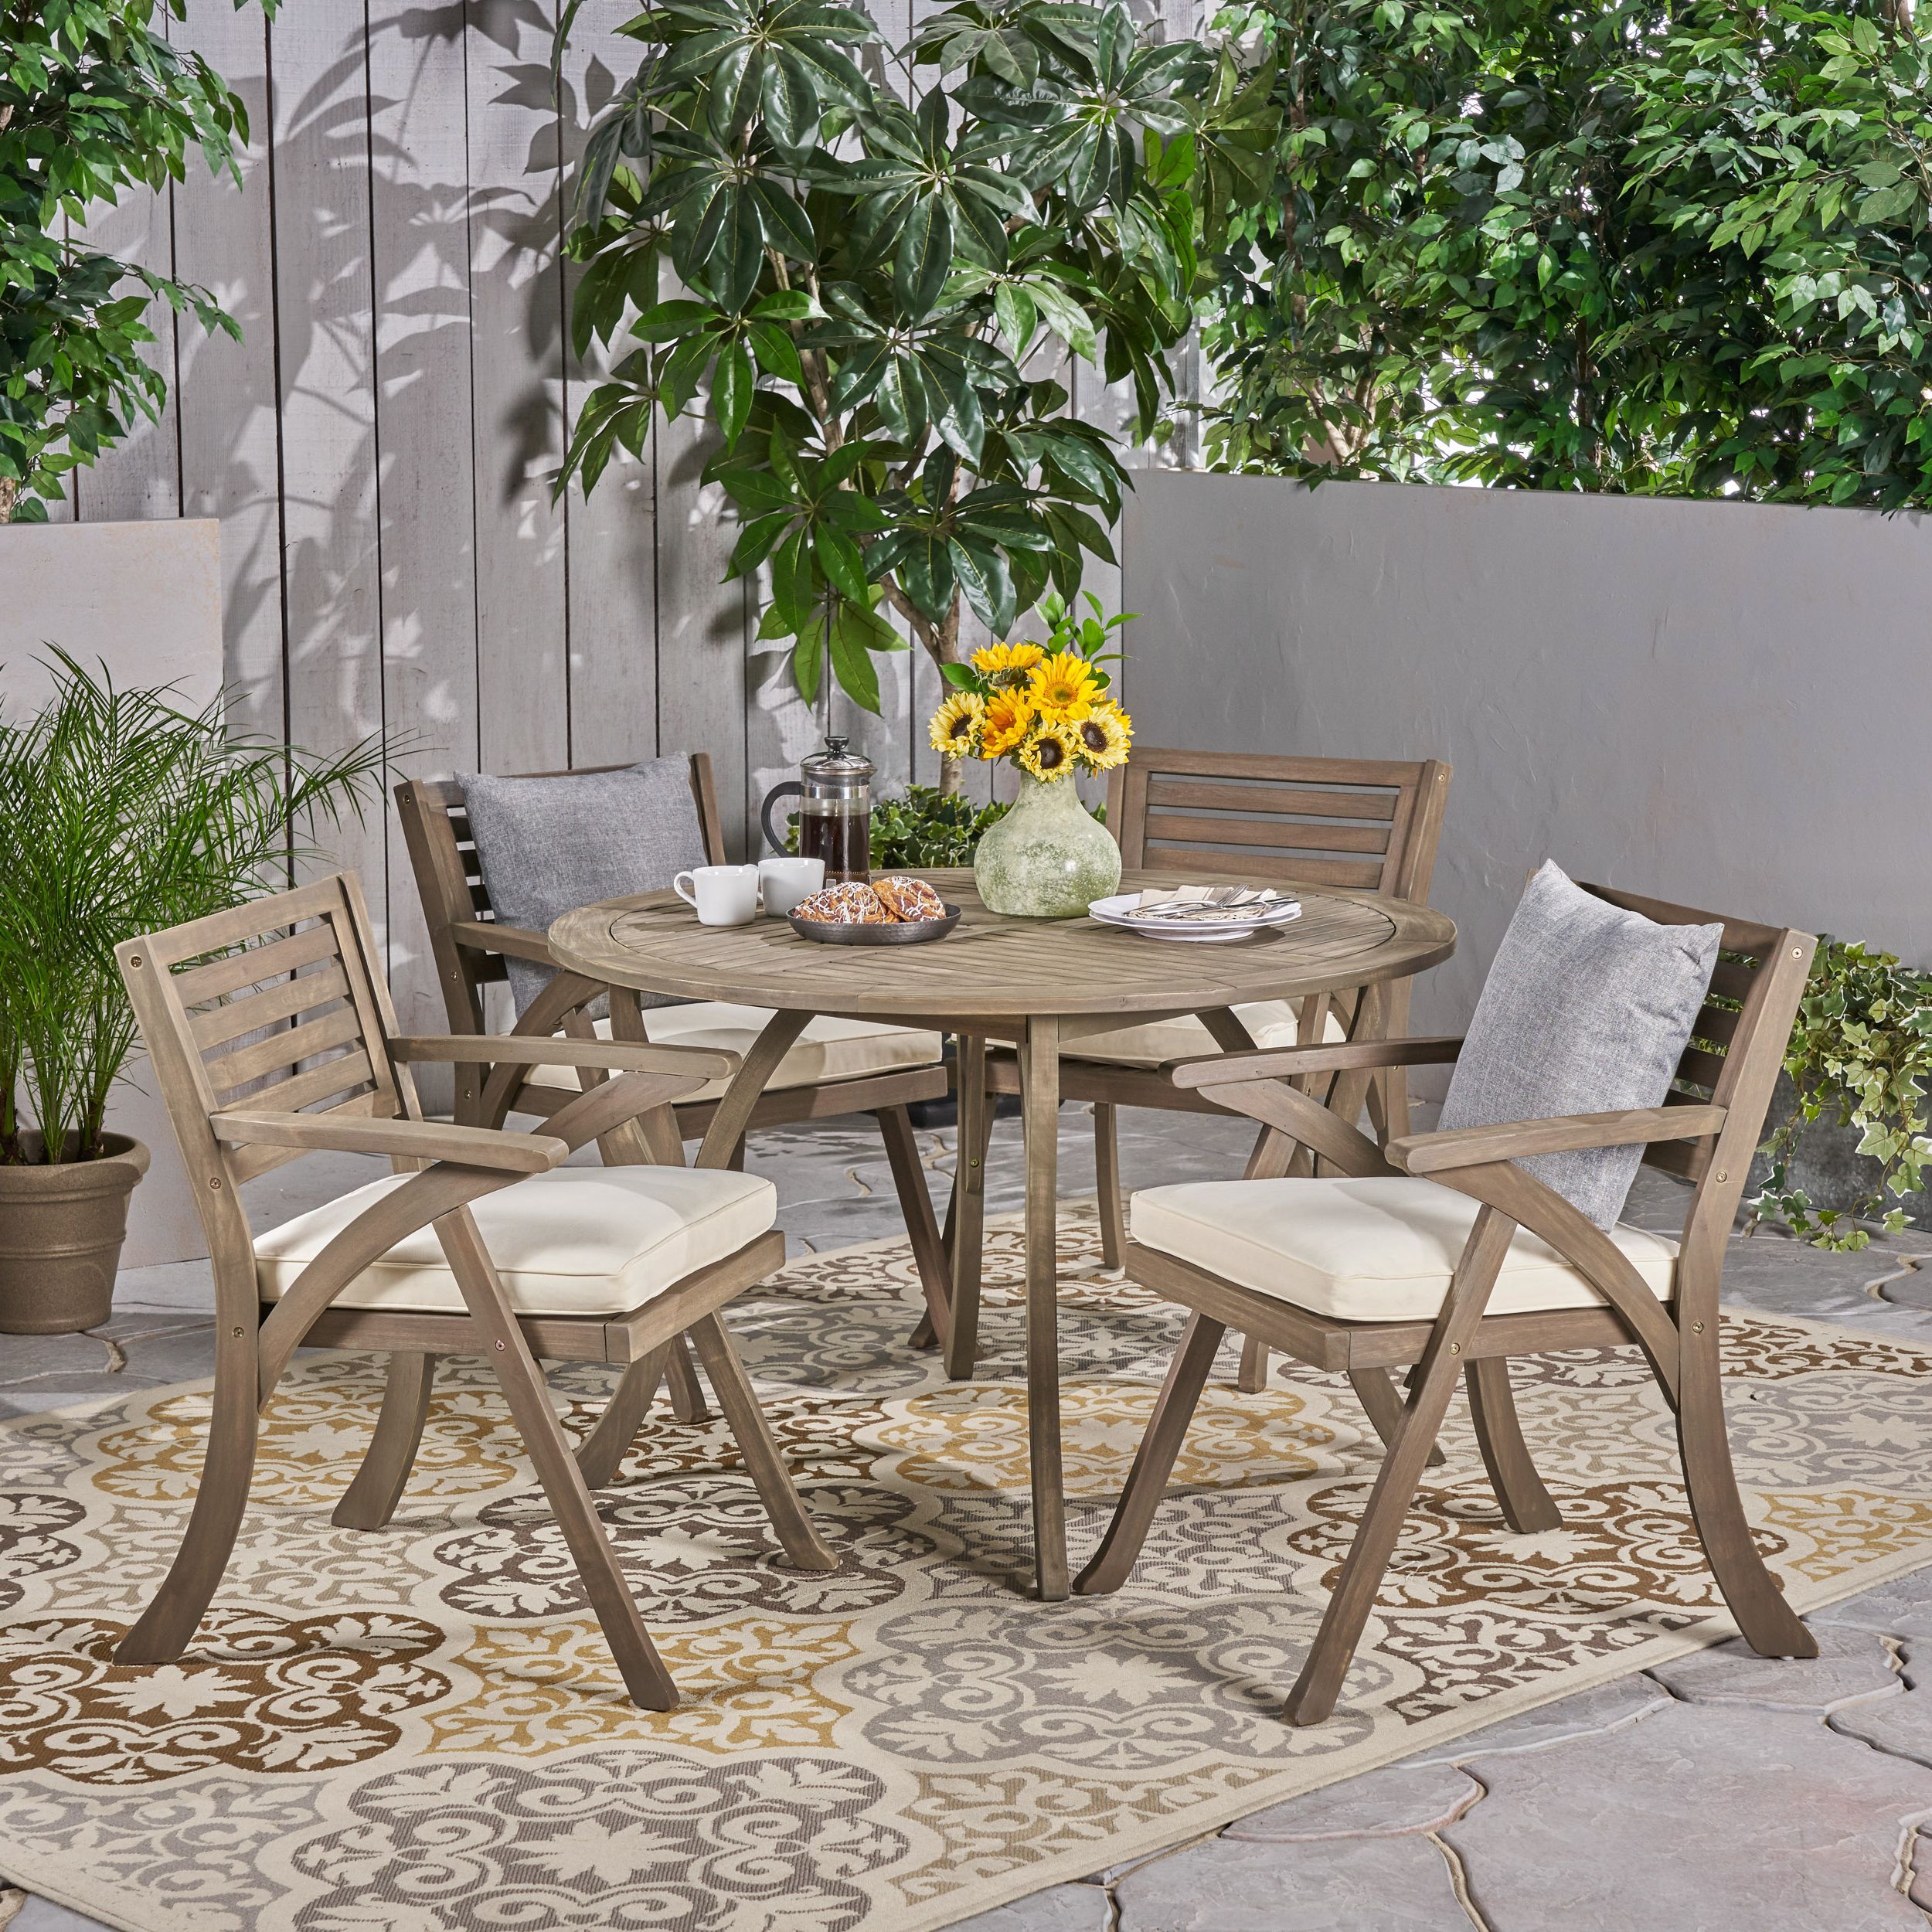 Most Recent Round 5 Piece Outdoor Patio Dining Sets Regarding Jordy Outdoor 5 Piece Acacia Wood Dining Set With Round Table, Gray (View 1 of 15)